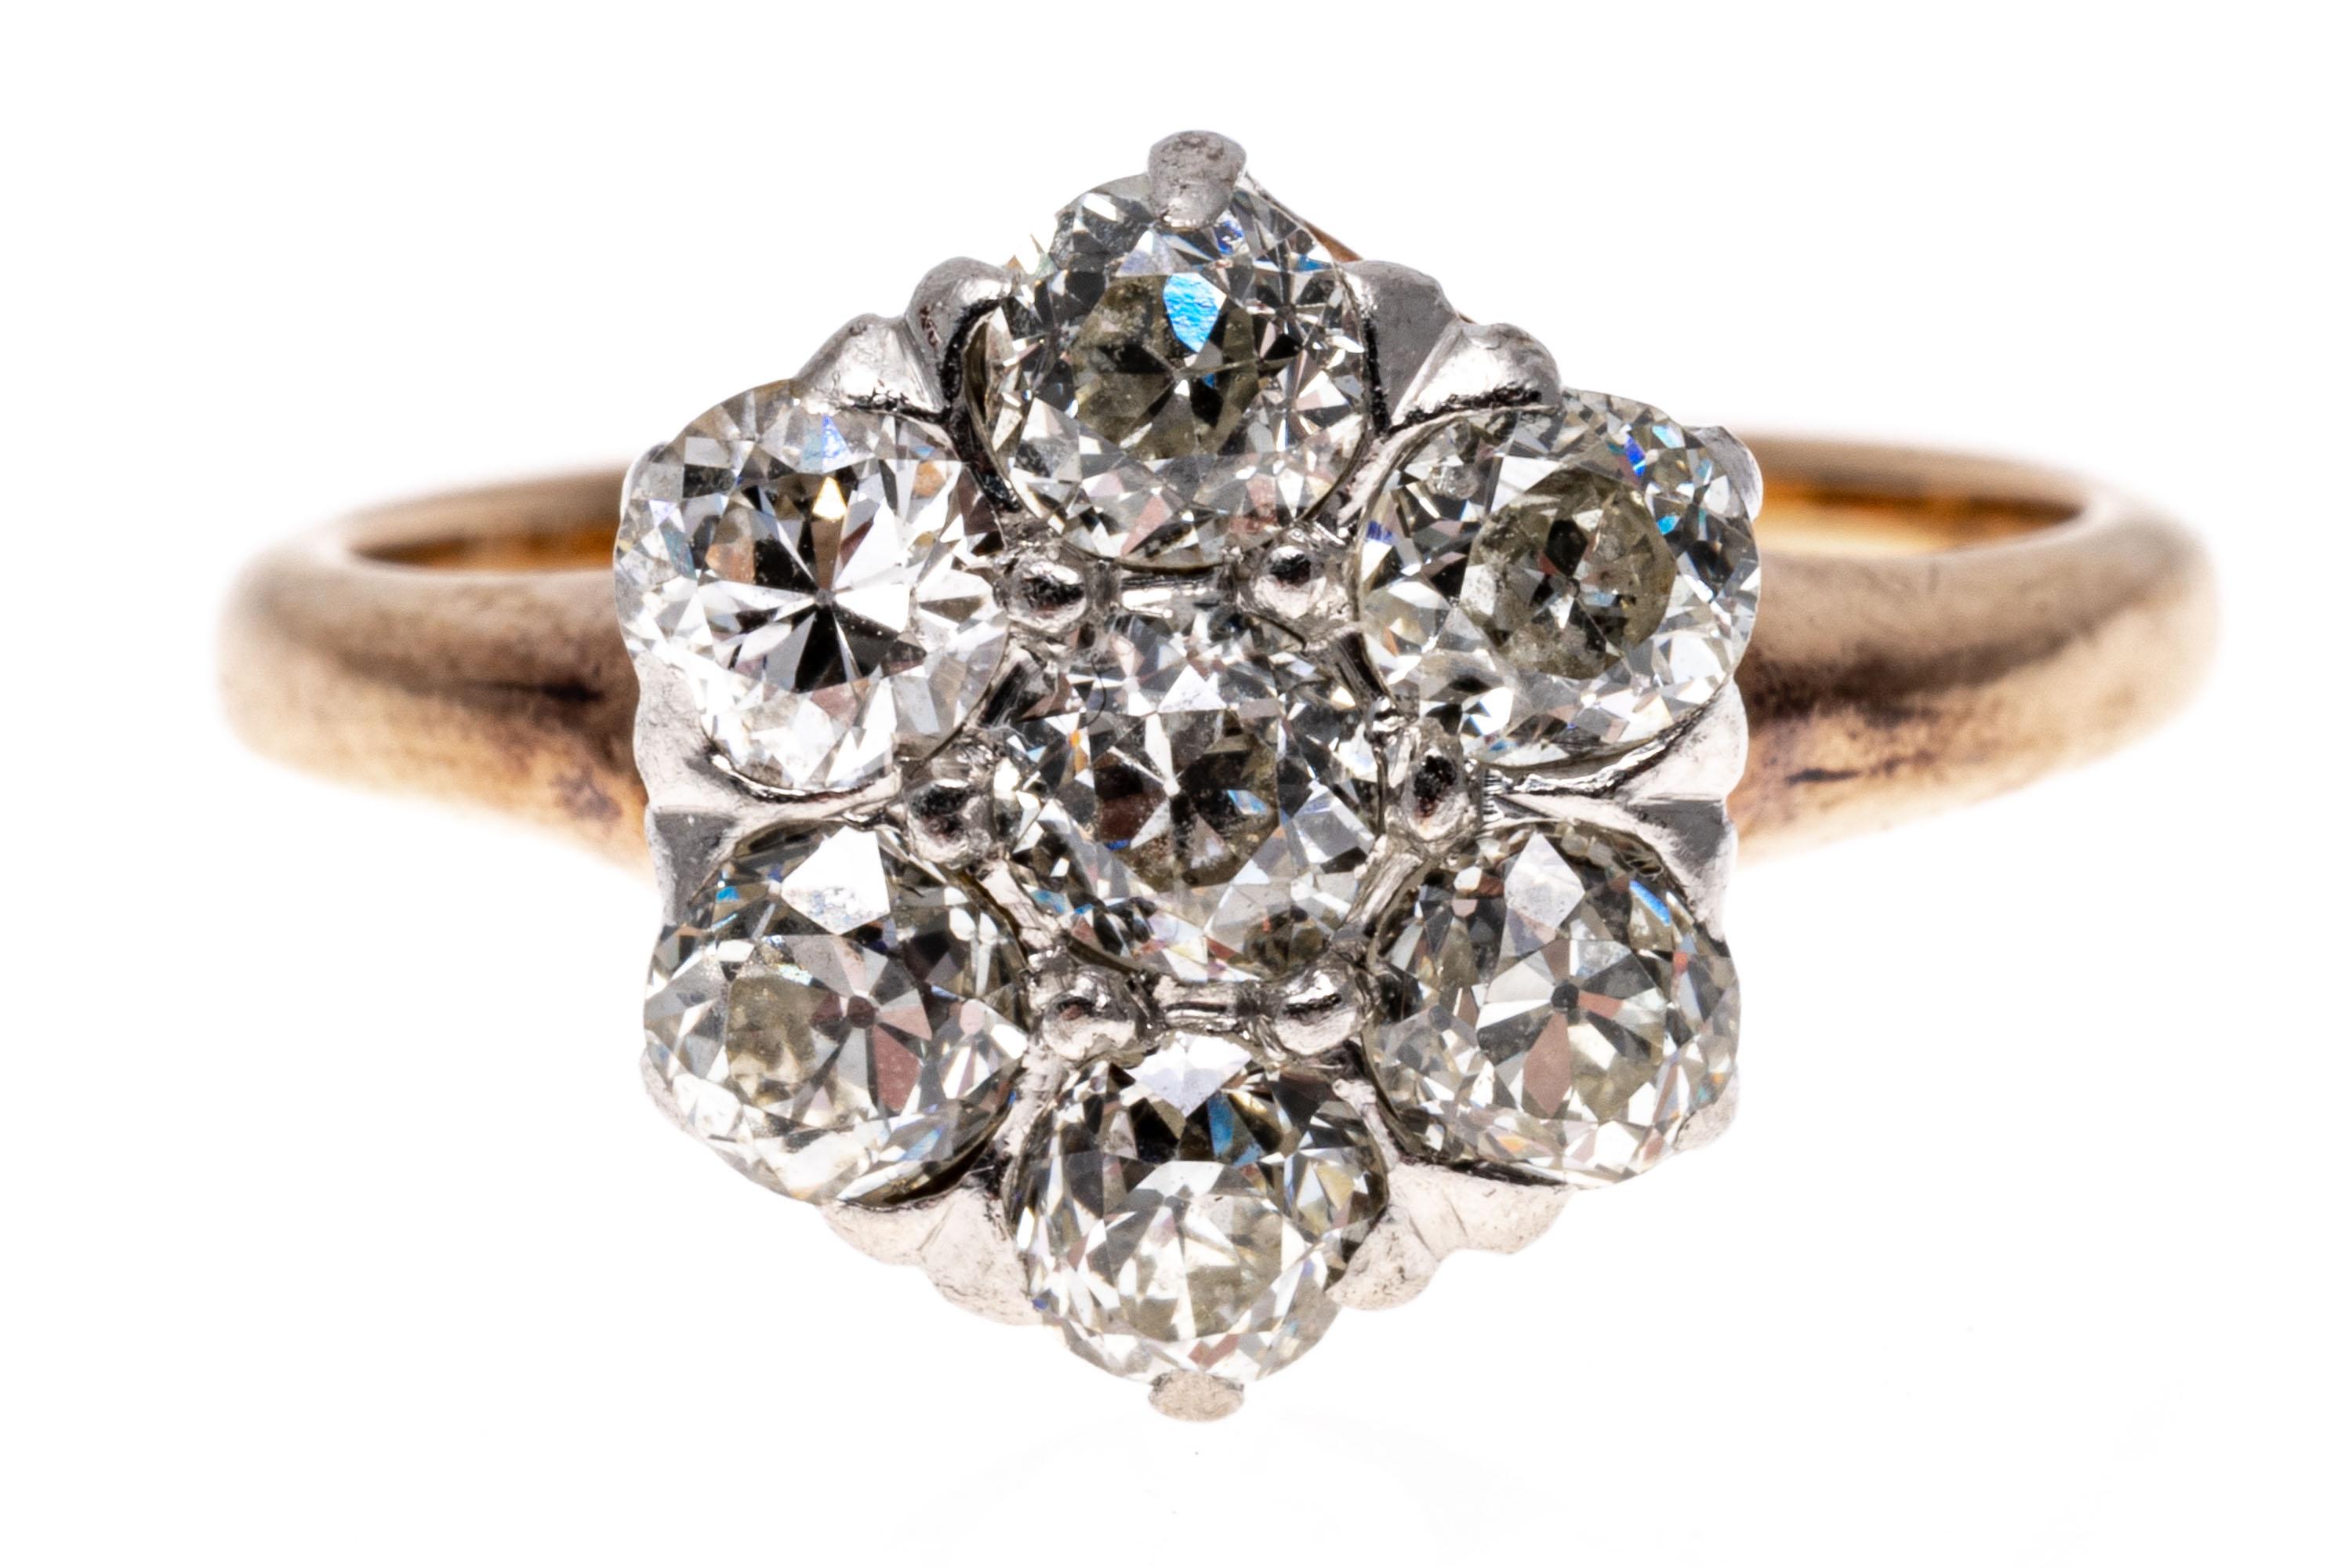 10k rose and white gold ring. This beautiful vintage ring is a round diamond cluster, set with old European cut diamonds, VS to SI clarity, approximately 0.56 TCW and prong set.
Marks: None, tests 10k
Dimensions: 5/16